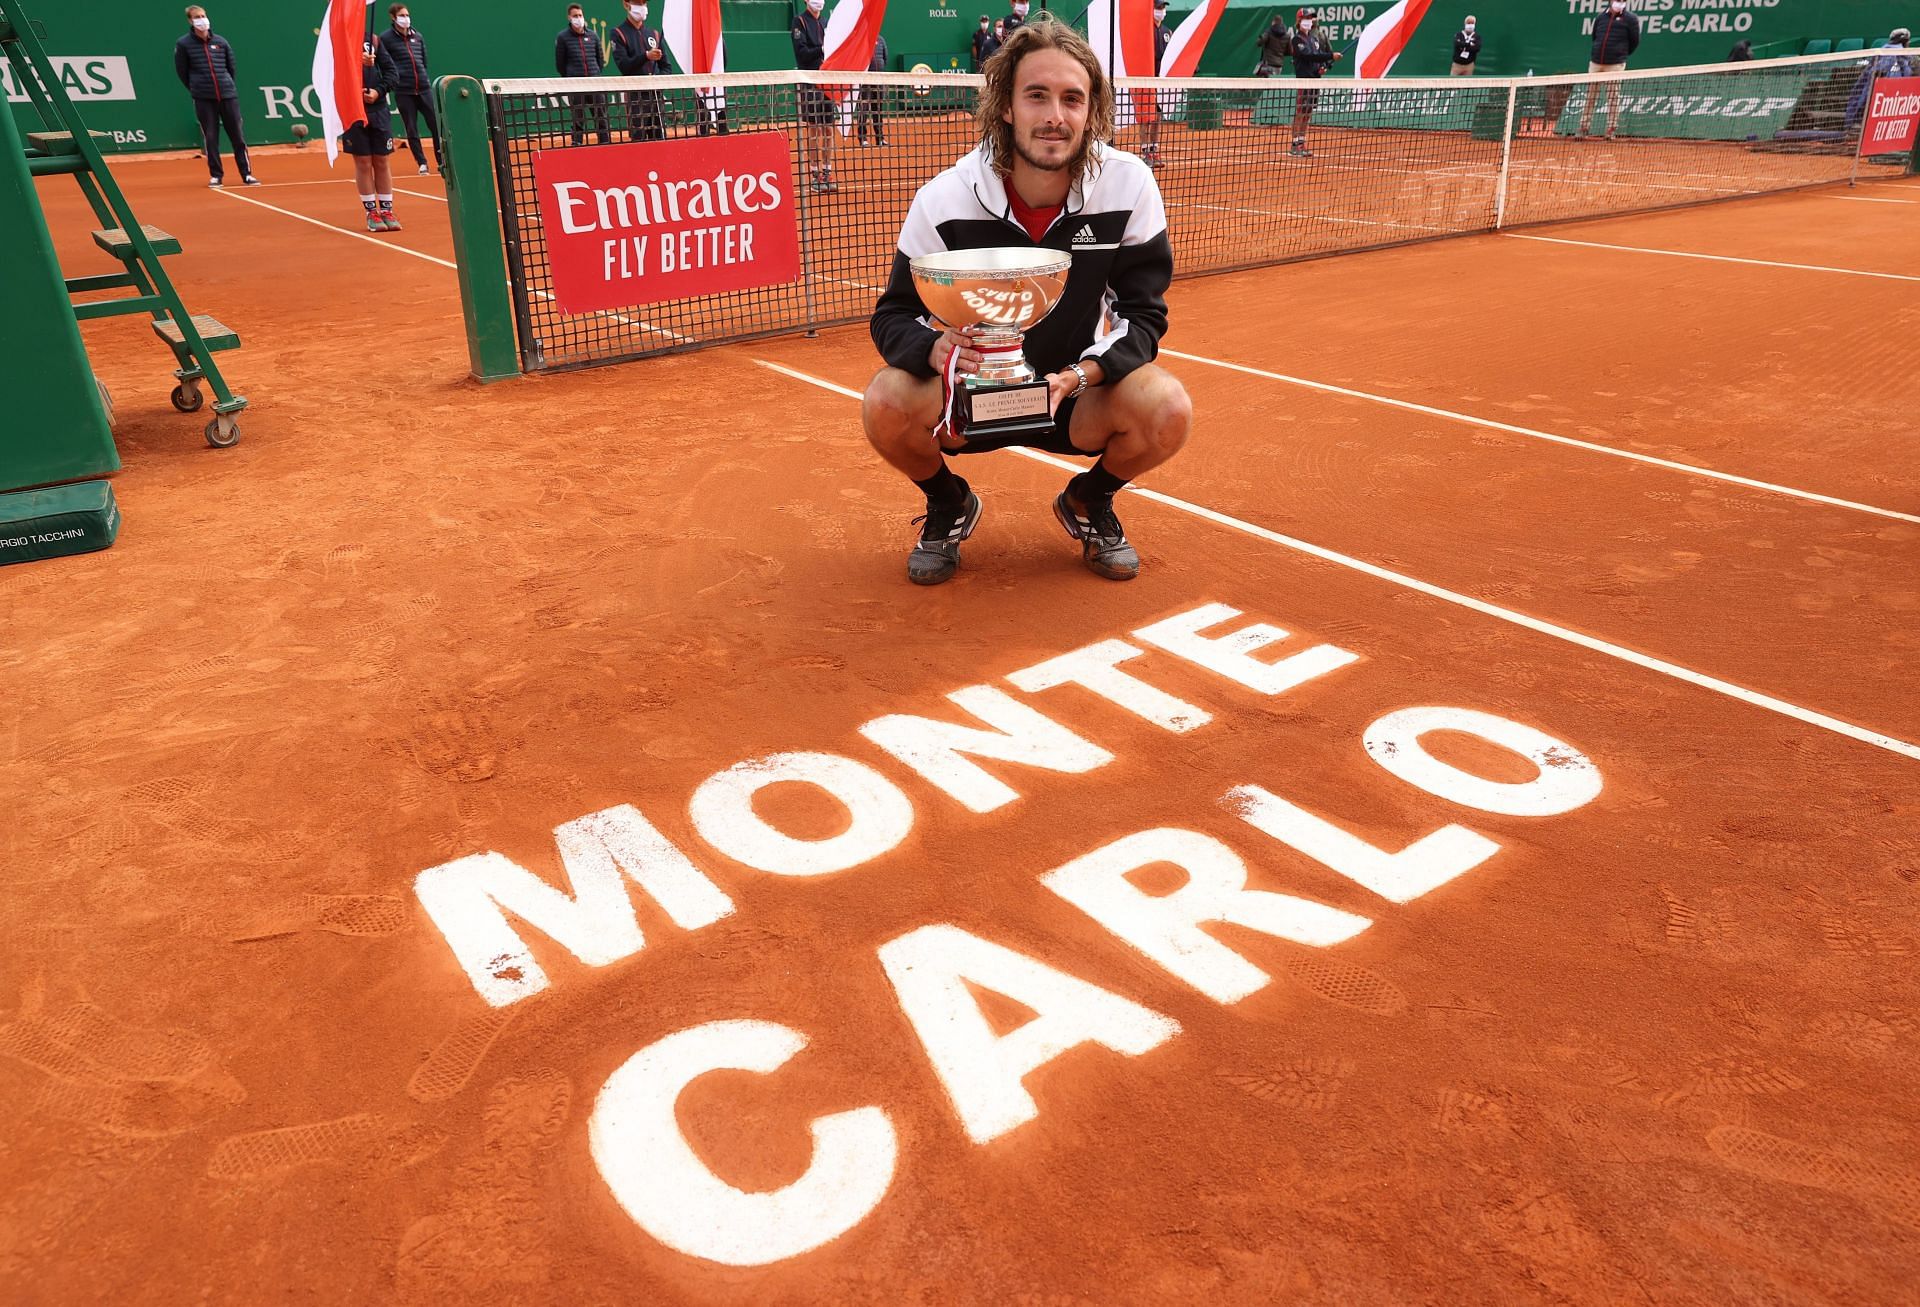 Tsisipas is the current defending champion at Monte Carlo